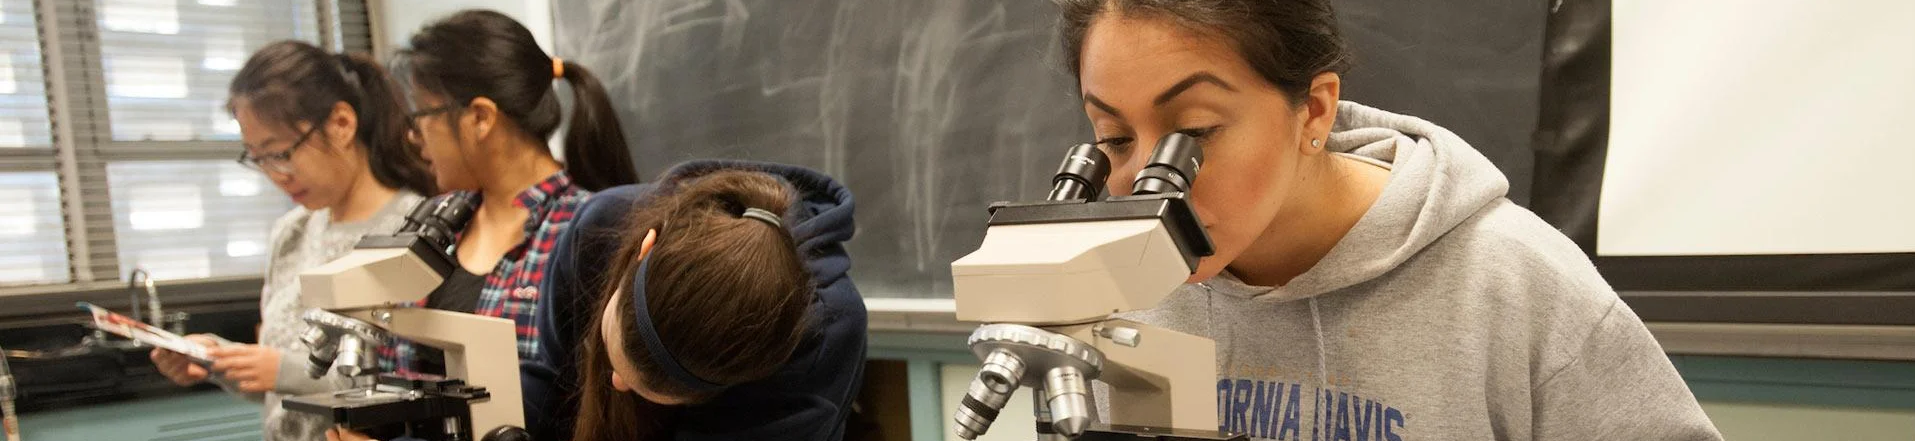 students using microscope at taking notes